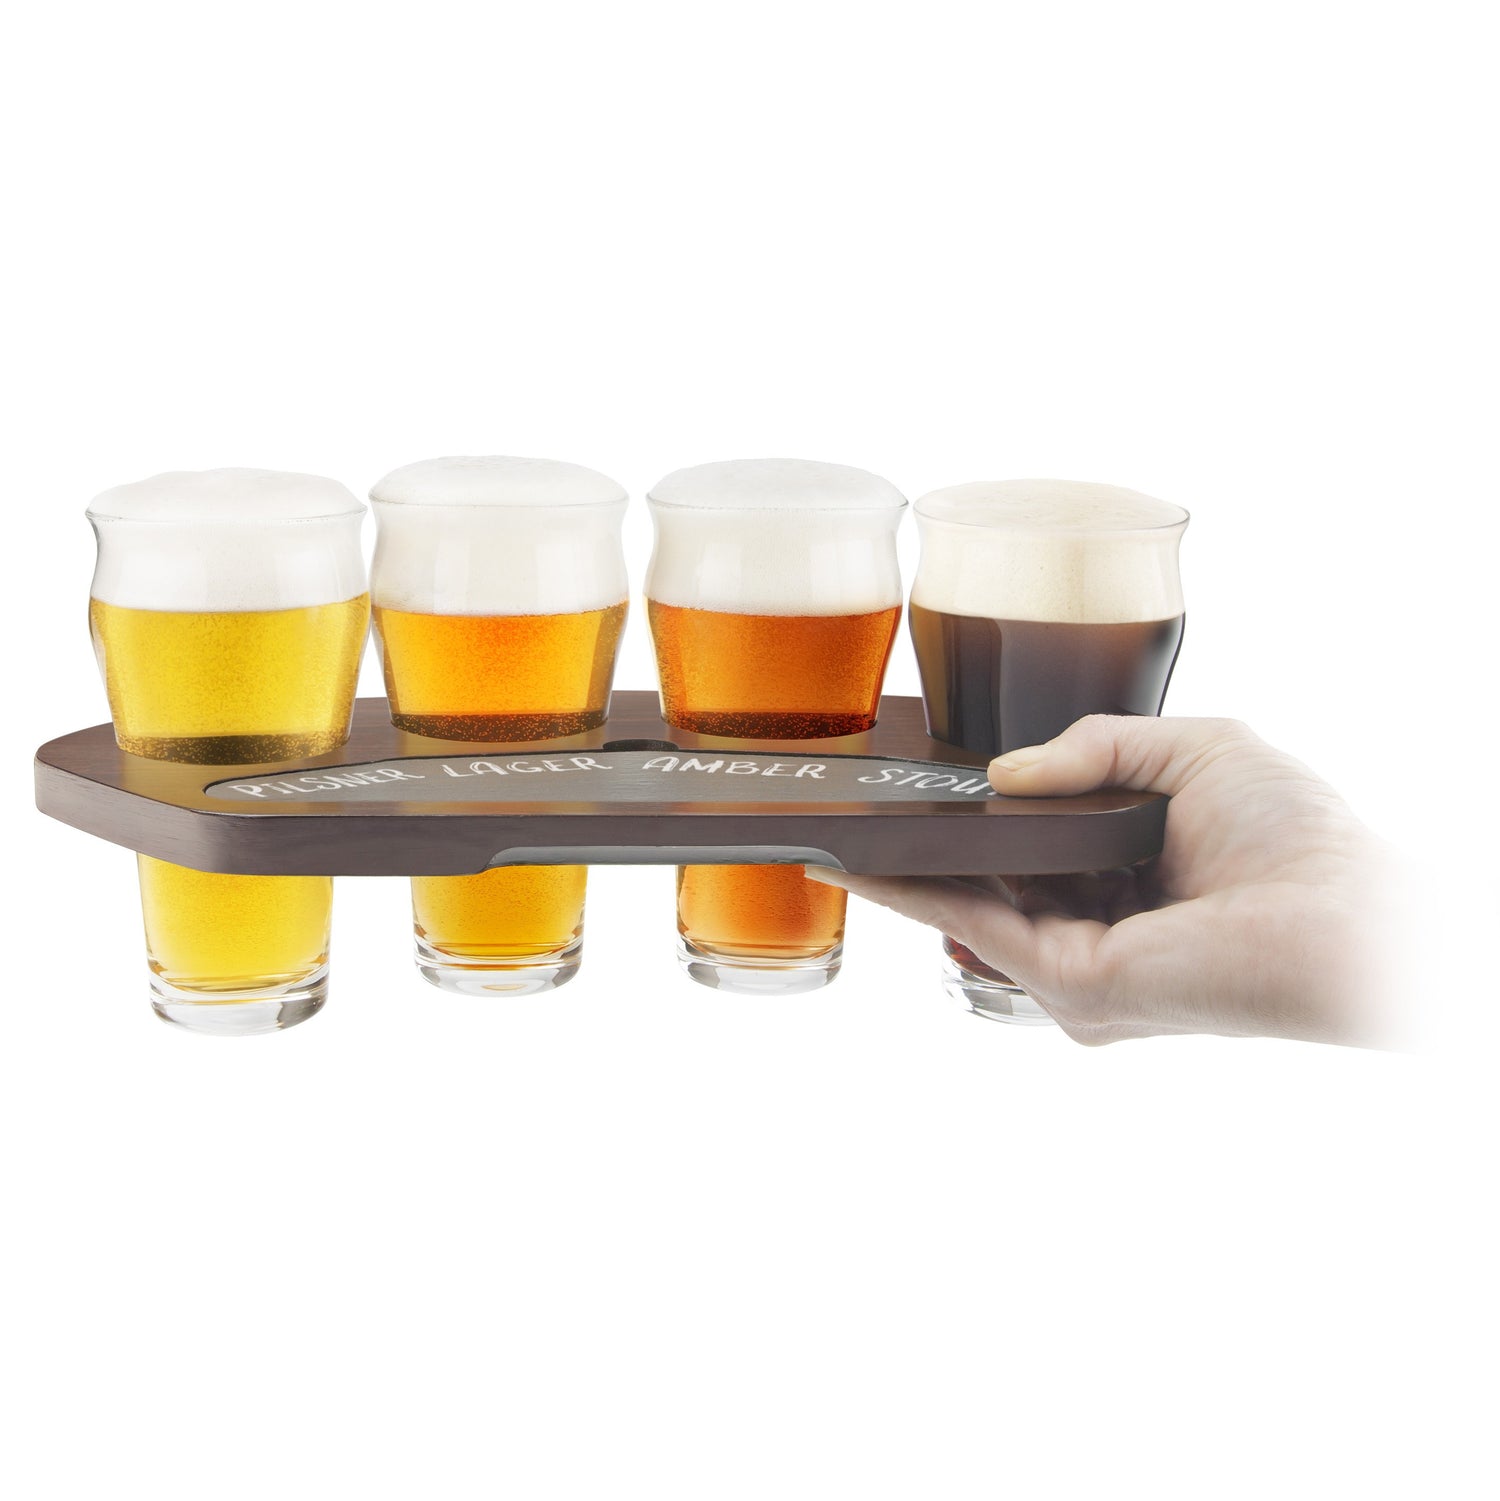 Final Touch Craft Beer Glasses s/2 - 886245009837